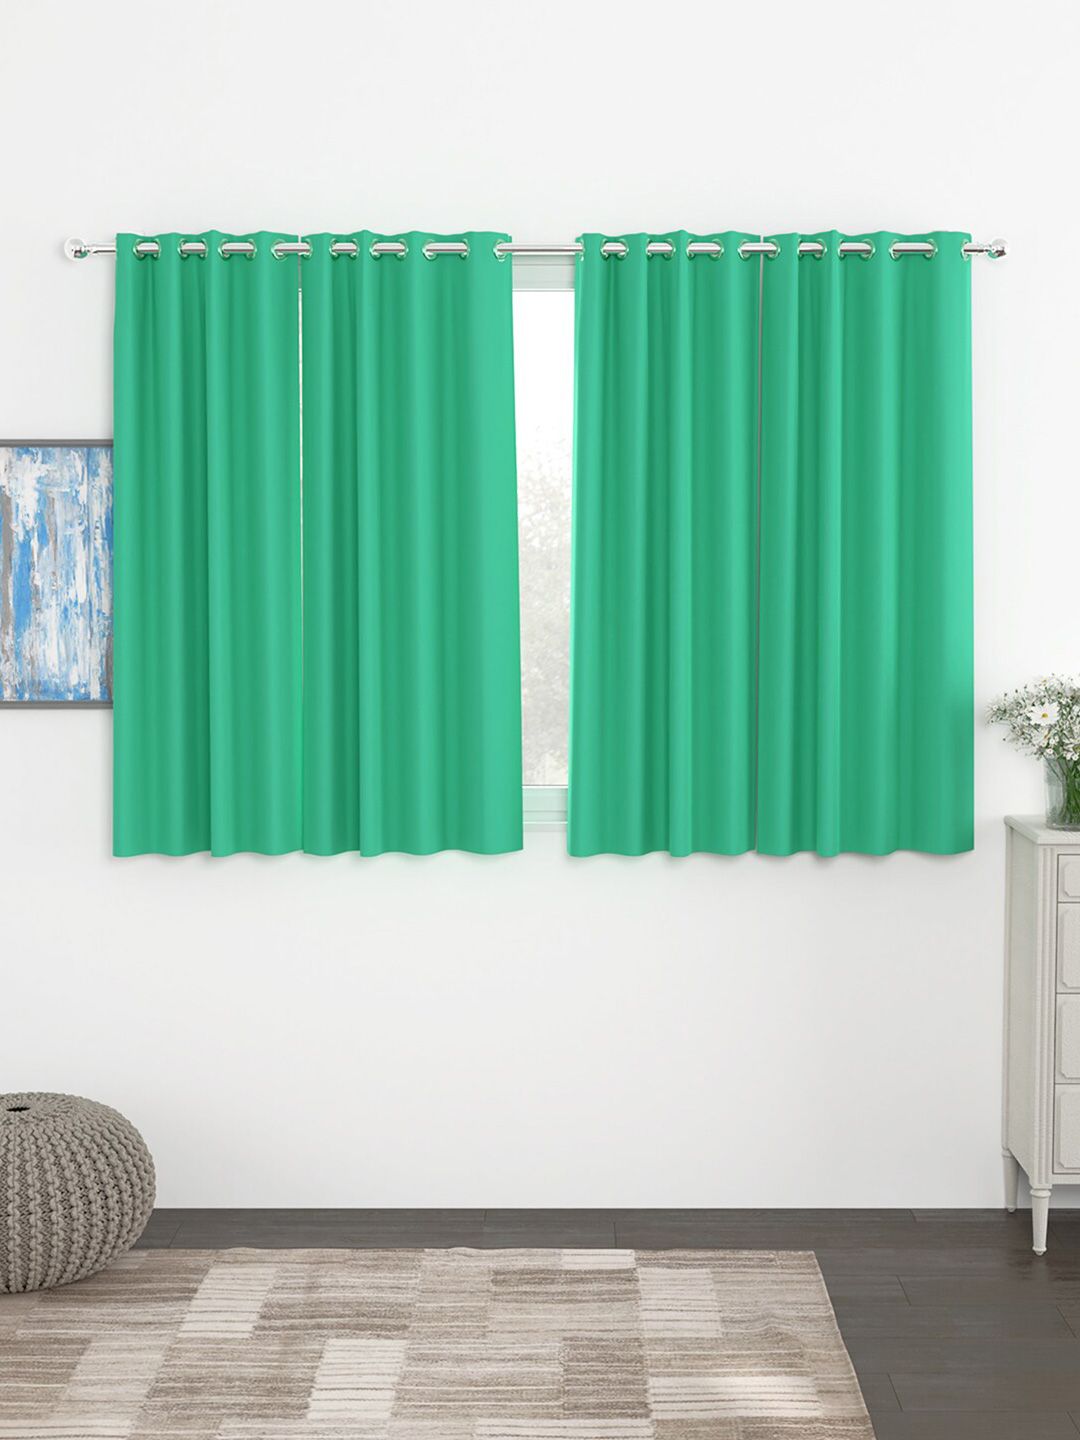 Story@home Teal Set of 4 Black Out Window Curtain Price in India